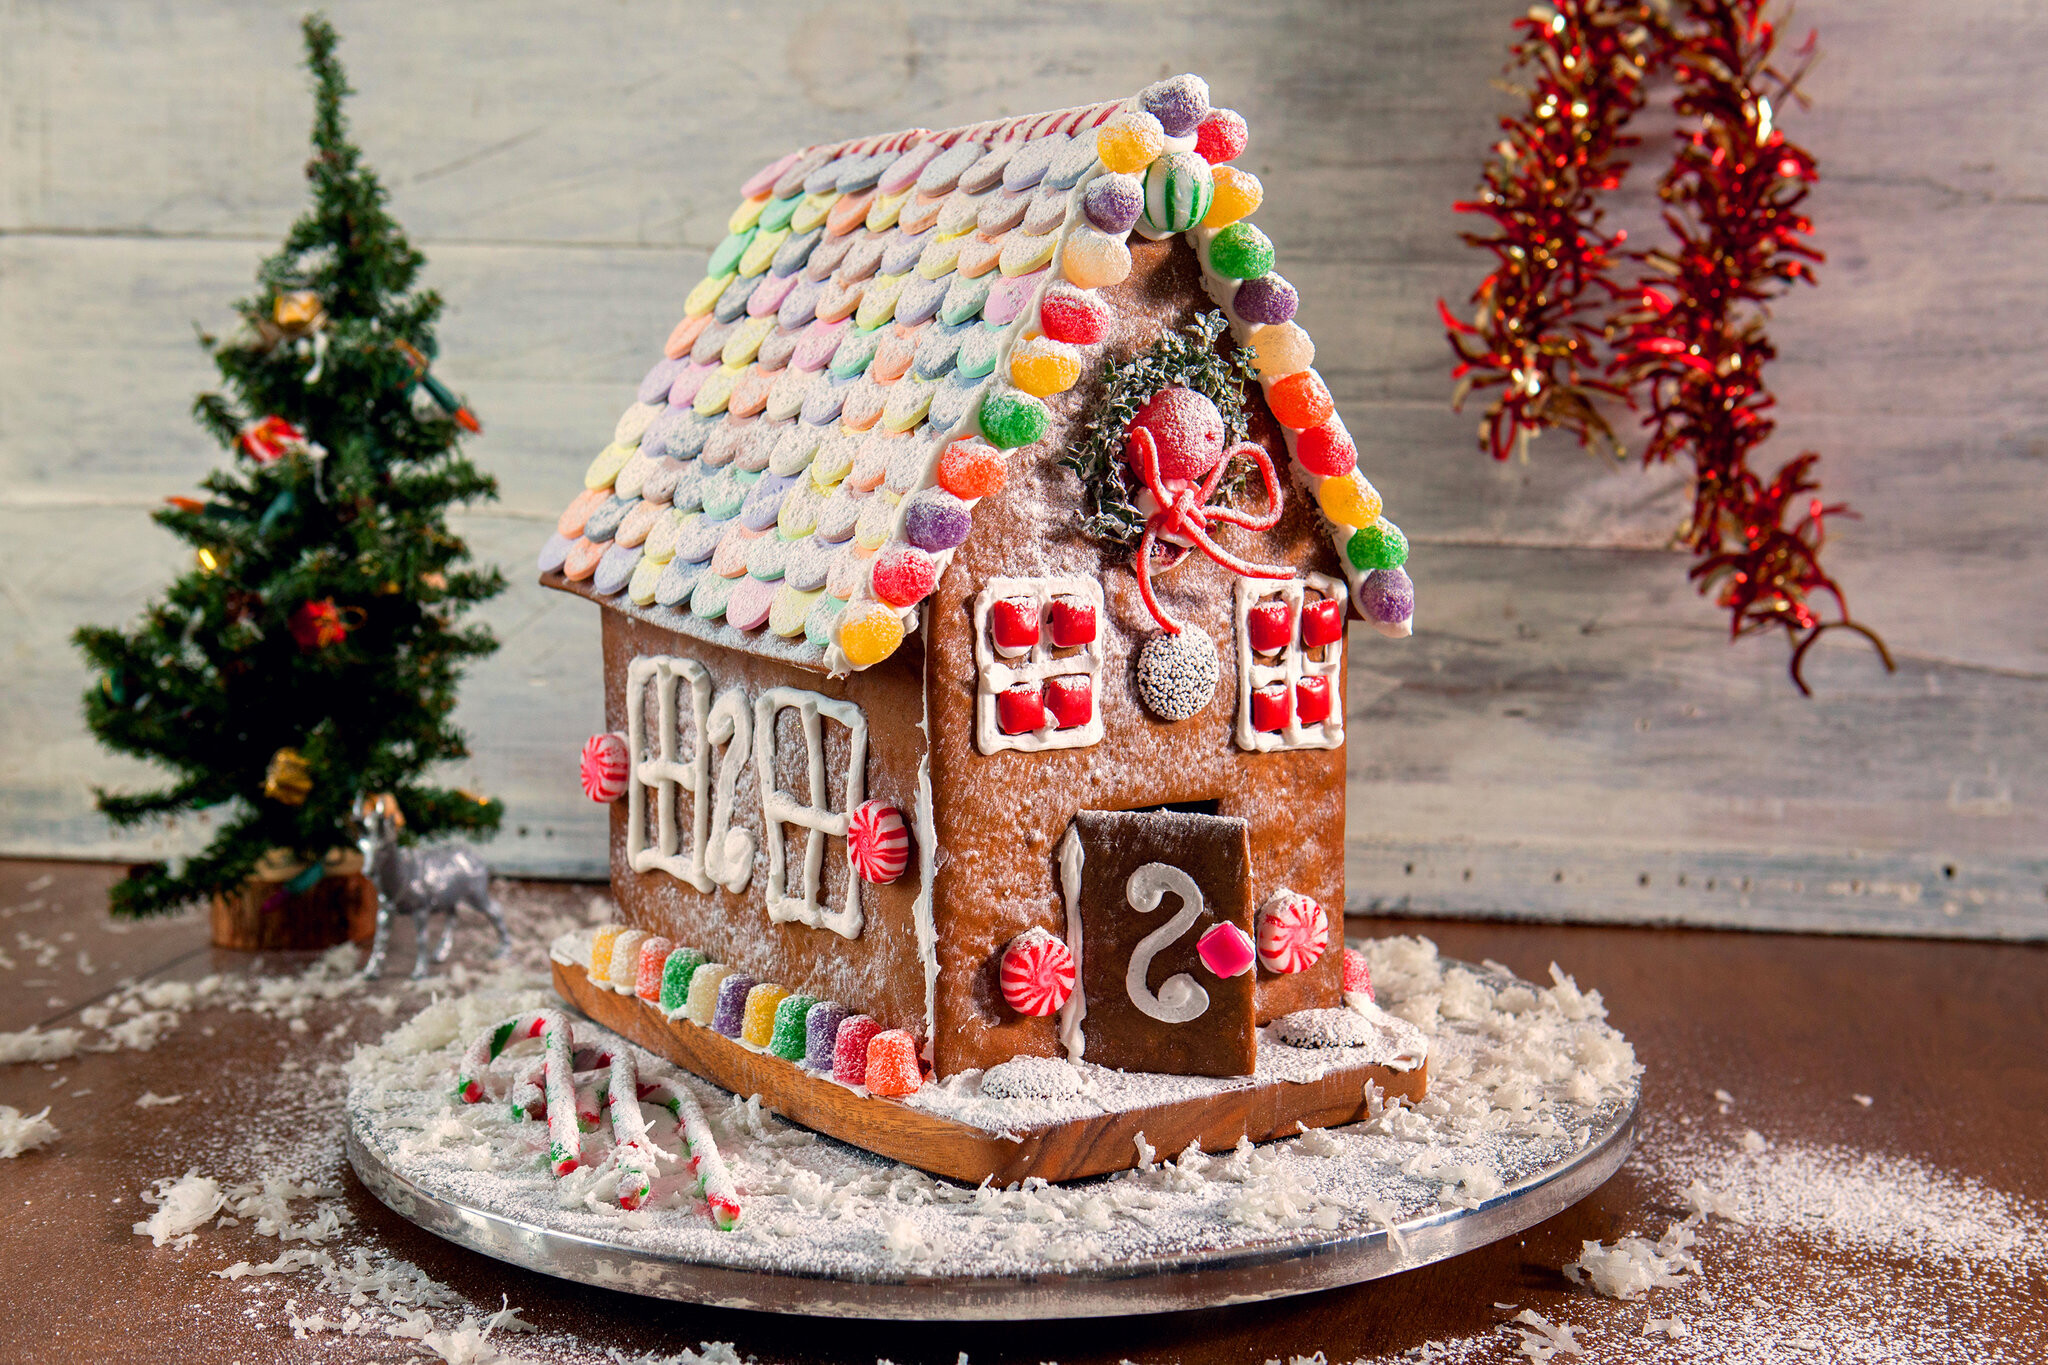 Gingerbread House: Cookie house, Peppermint swirl candies, Candy canes, Dough for gingerbread construction projects. 2050x1370 HD Wallpaper.